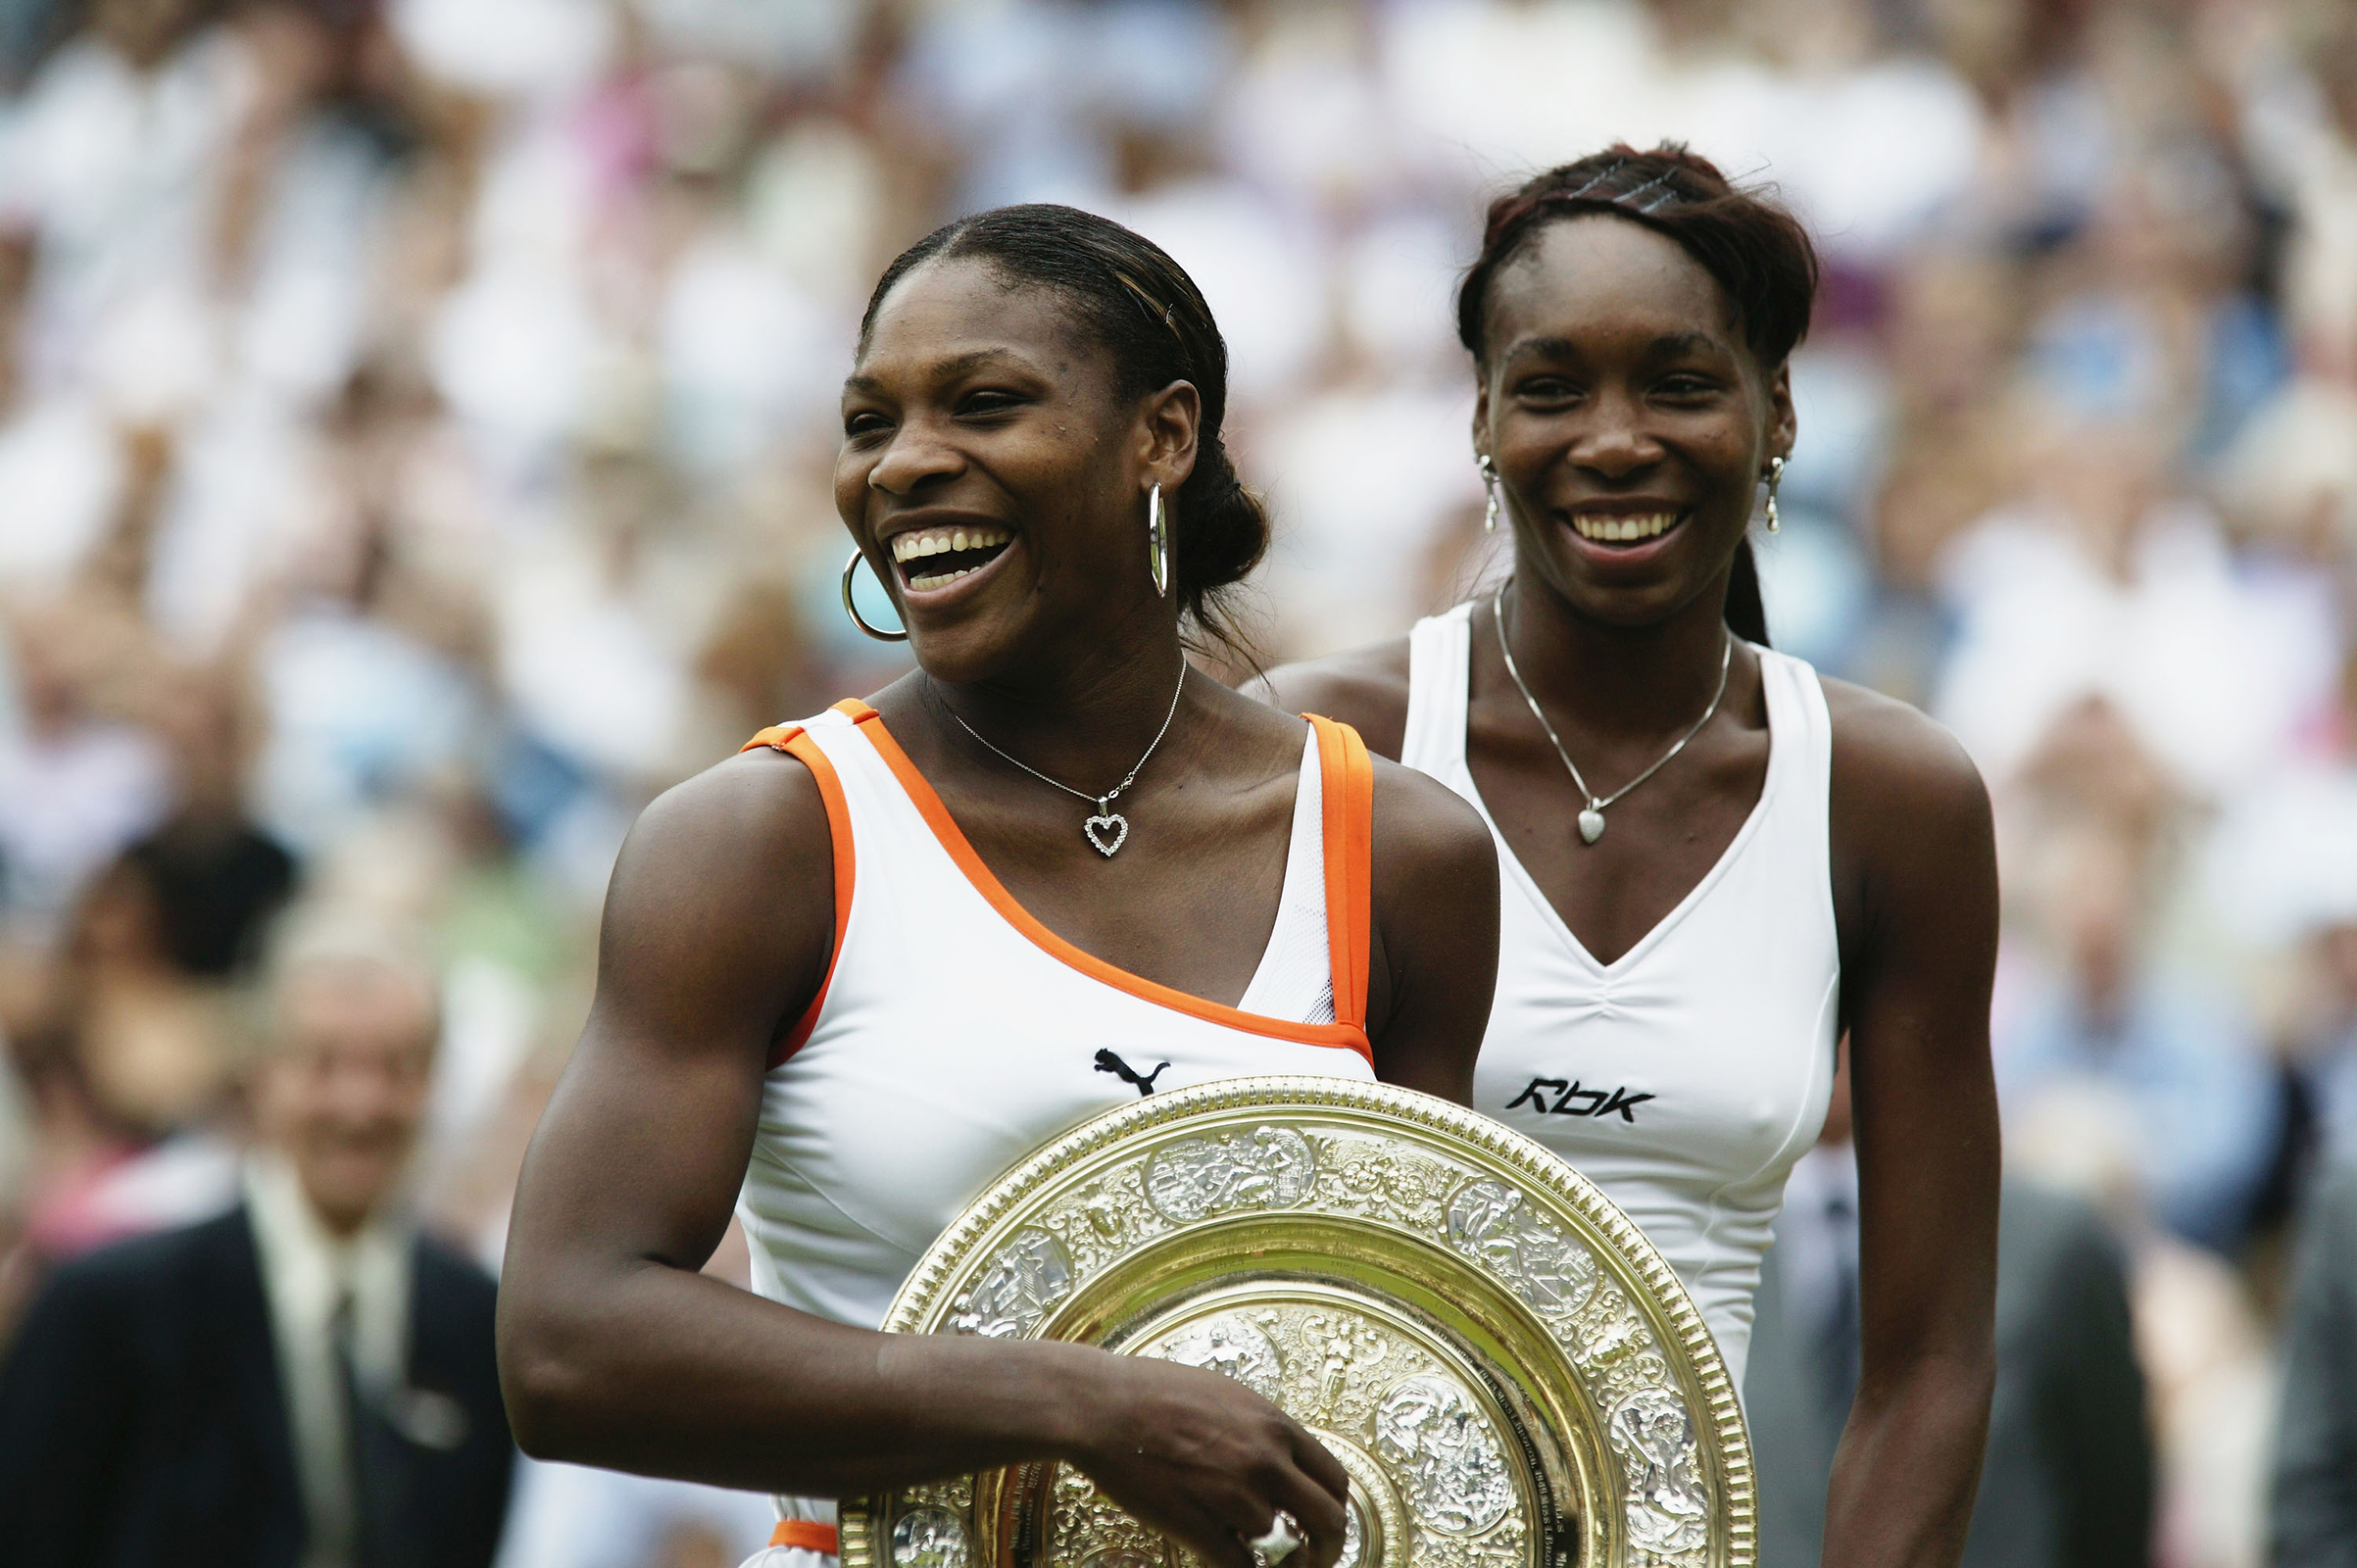 Serena Williams (L) of the USA holding the trophy after her match against sister Venus Williams of the USA in the Womens Singles Final during day twelve of the Wimbledon Lawn Tennis Championships held on July 5, 2003 at the All England Lawn Tennis and Croquet Club, in Wimbledon, London. (Alex Livesey—Getty Images)